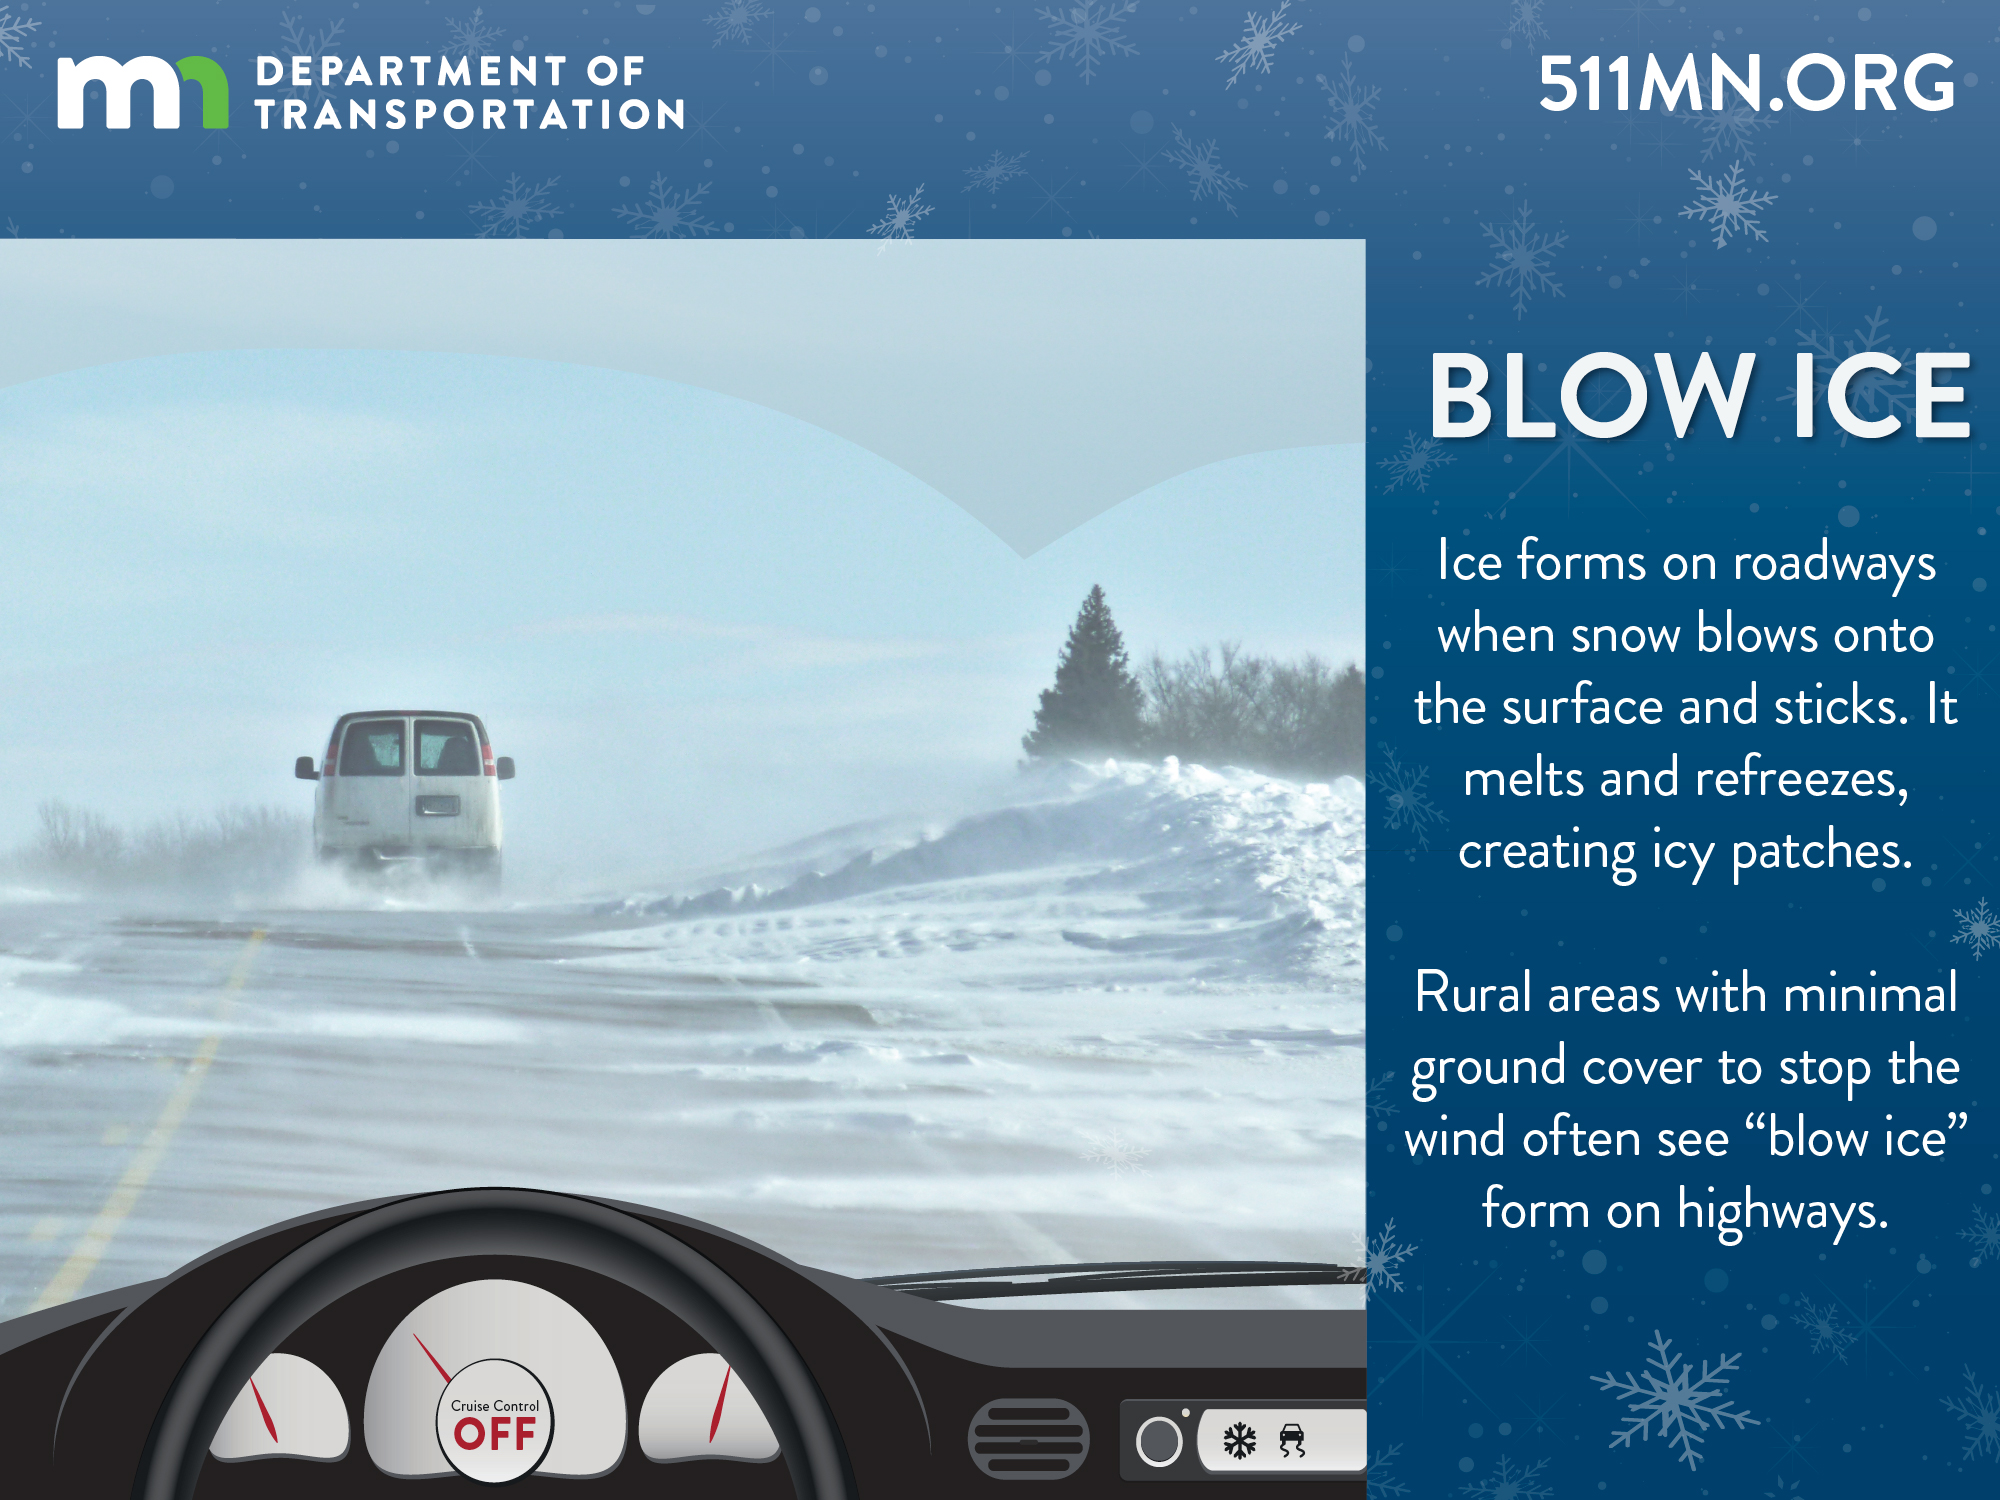 Ice forms on roadways when snow blows onto the surface and sticks. It melts and refreezes, creating icy patches. Rural areas with minimal ground cover to stop the wind often see “blow ice” form on highways.